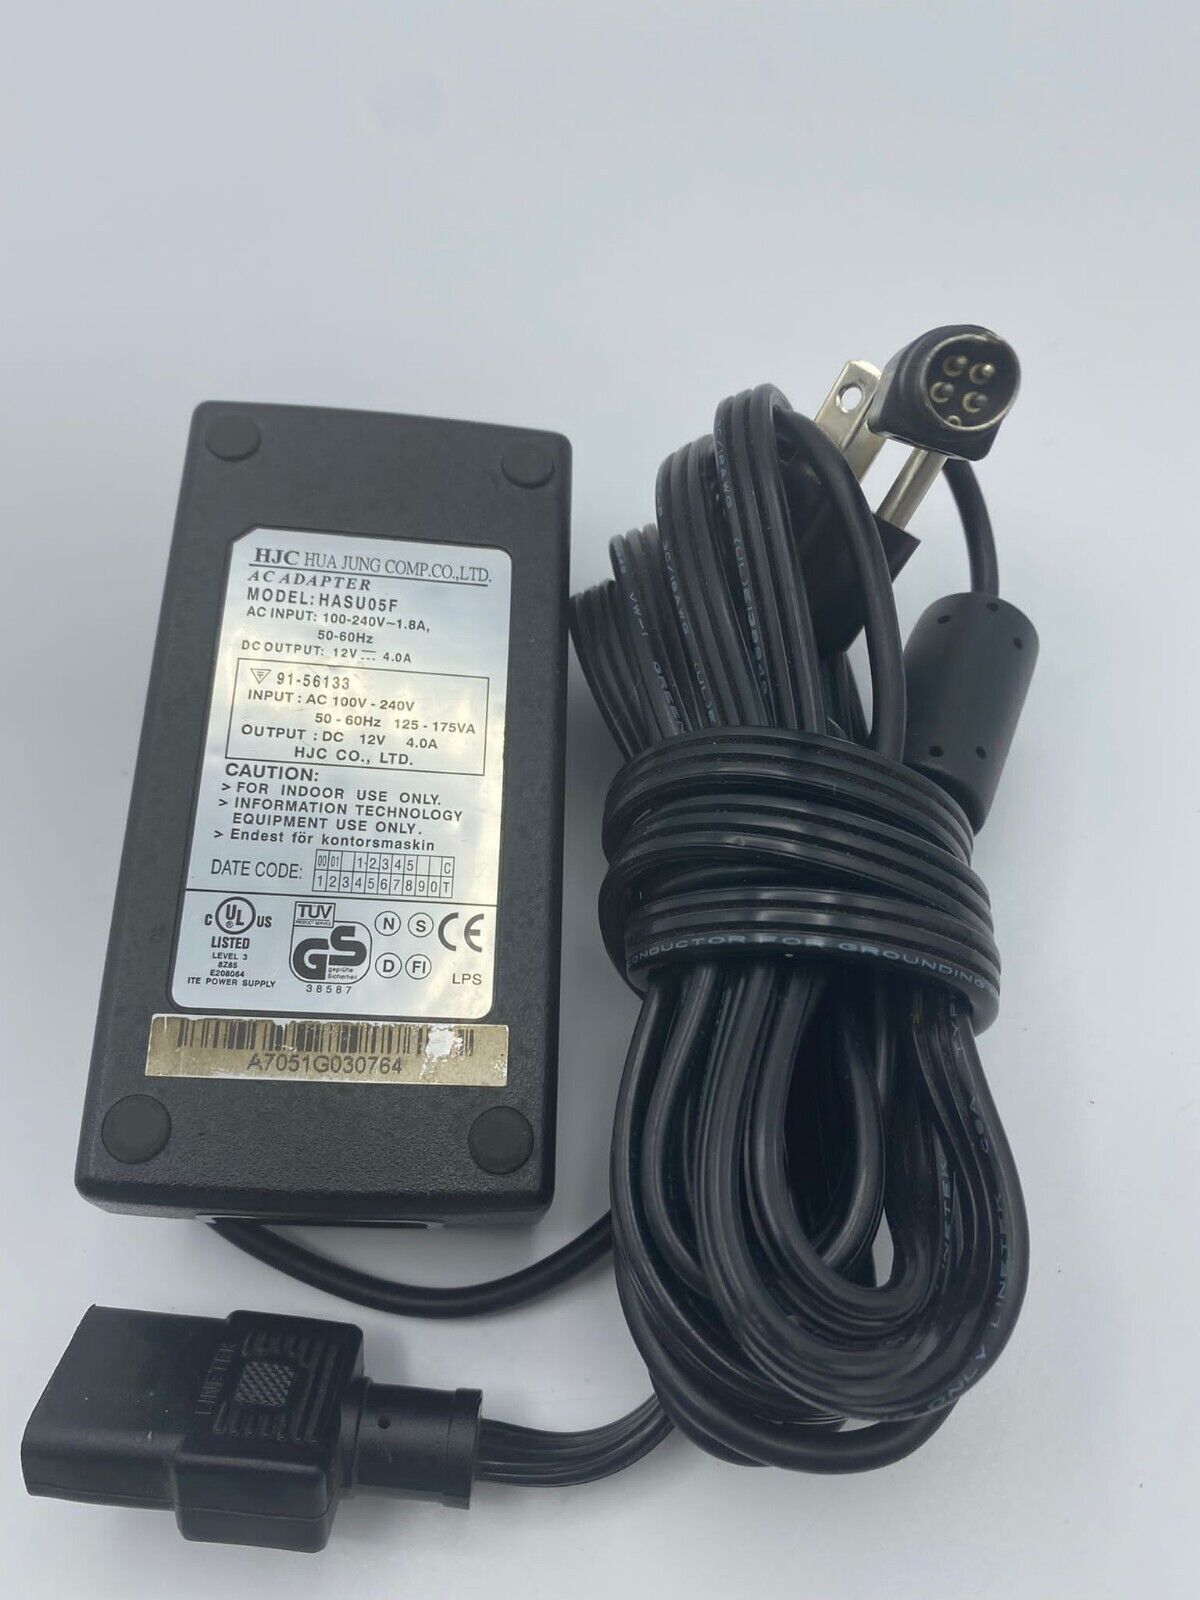 brand new HJC HASU05F AC Power Supply Adapter Charger Output 12V 4.0A 12 Volts 4 Pin Brand: HJC Type: Adapter Connec - Click Image to Close